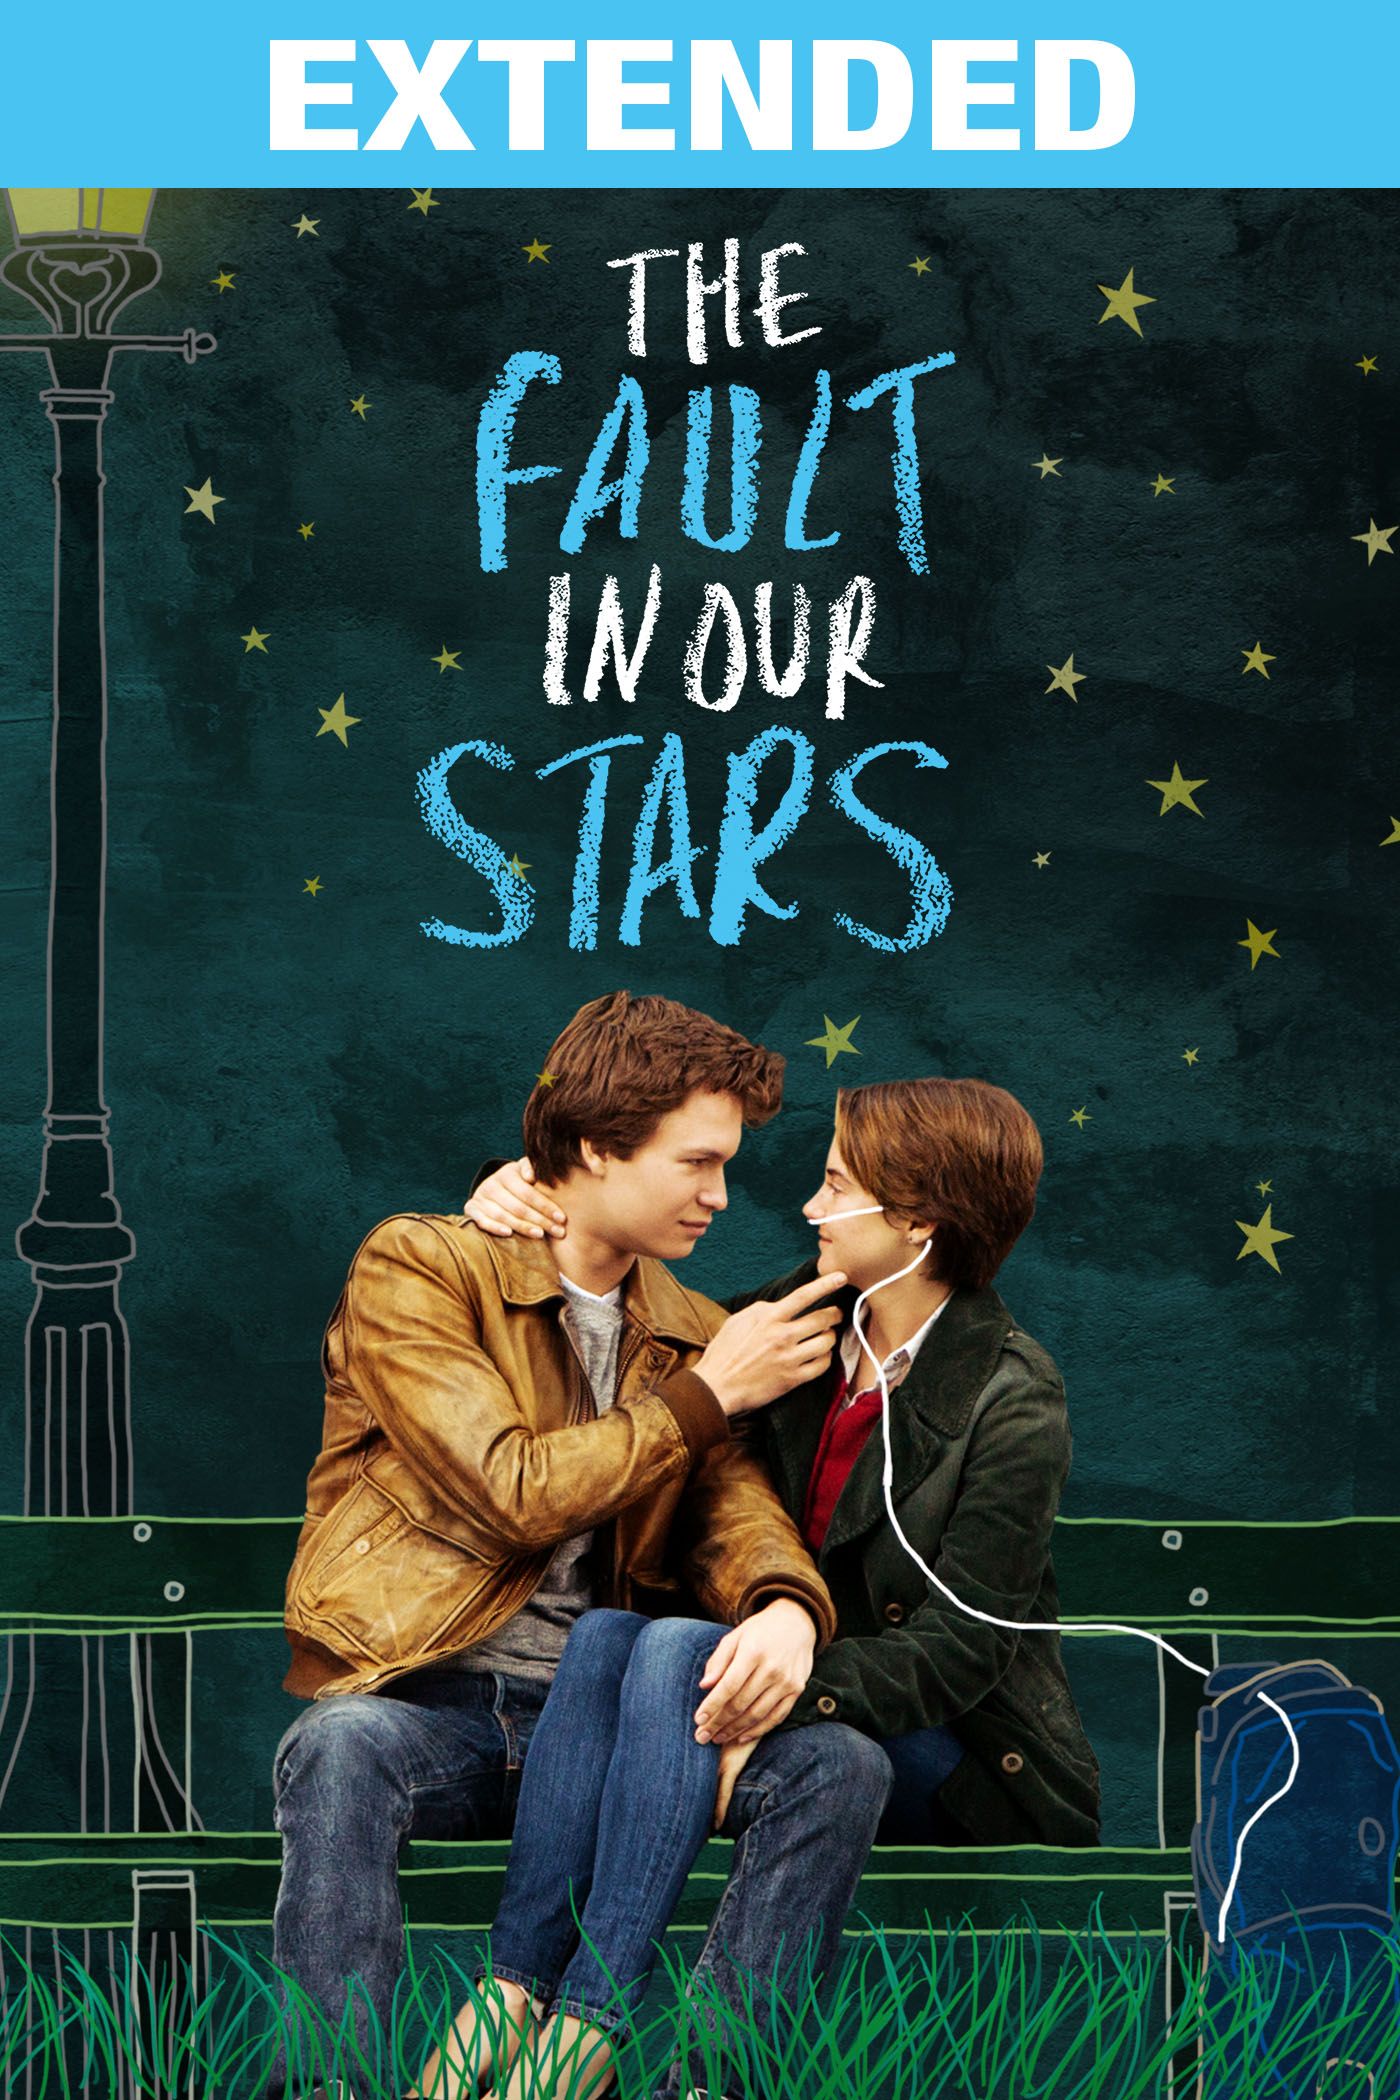 the fault in our stars full movie